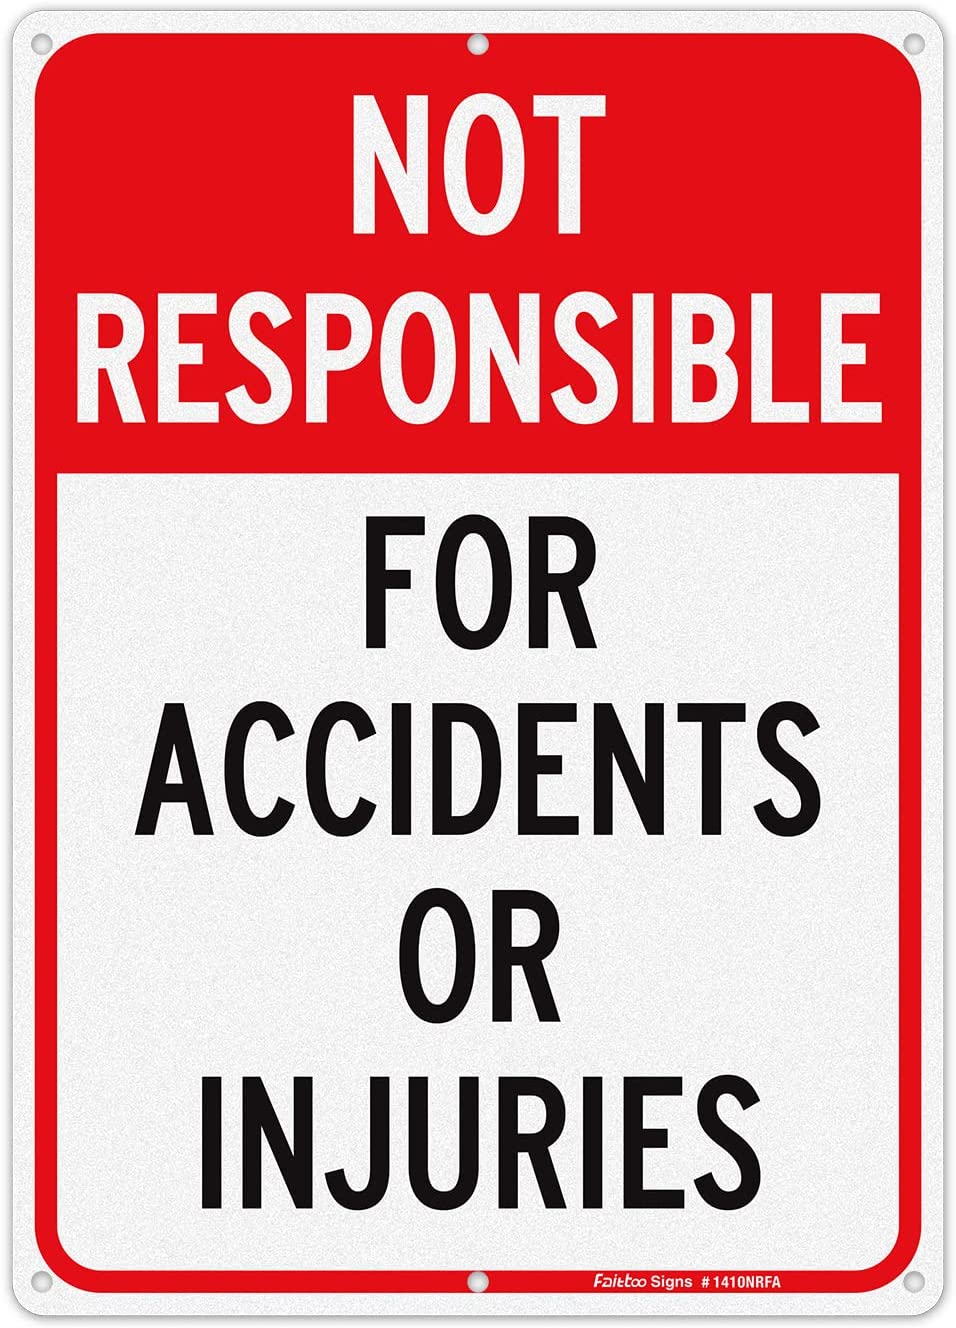 Faittoo Not Responsible for Accidents or Injuries Sign, Enter at Your Own Risk Warning Sign, 14 x 10 Inch Reflective Rust Free Aluminum Sign, Weather/Fade Resistant, Easy to Install, Outdoors Use